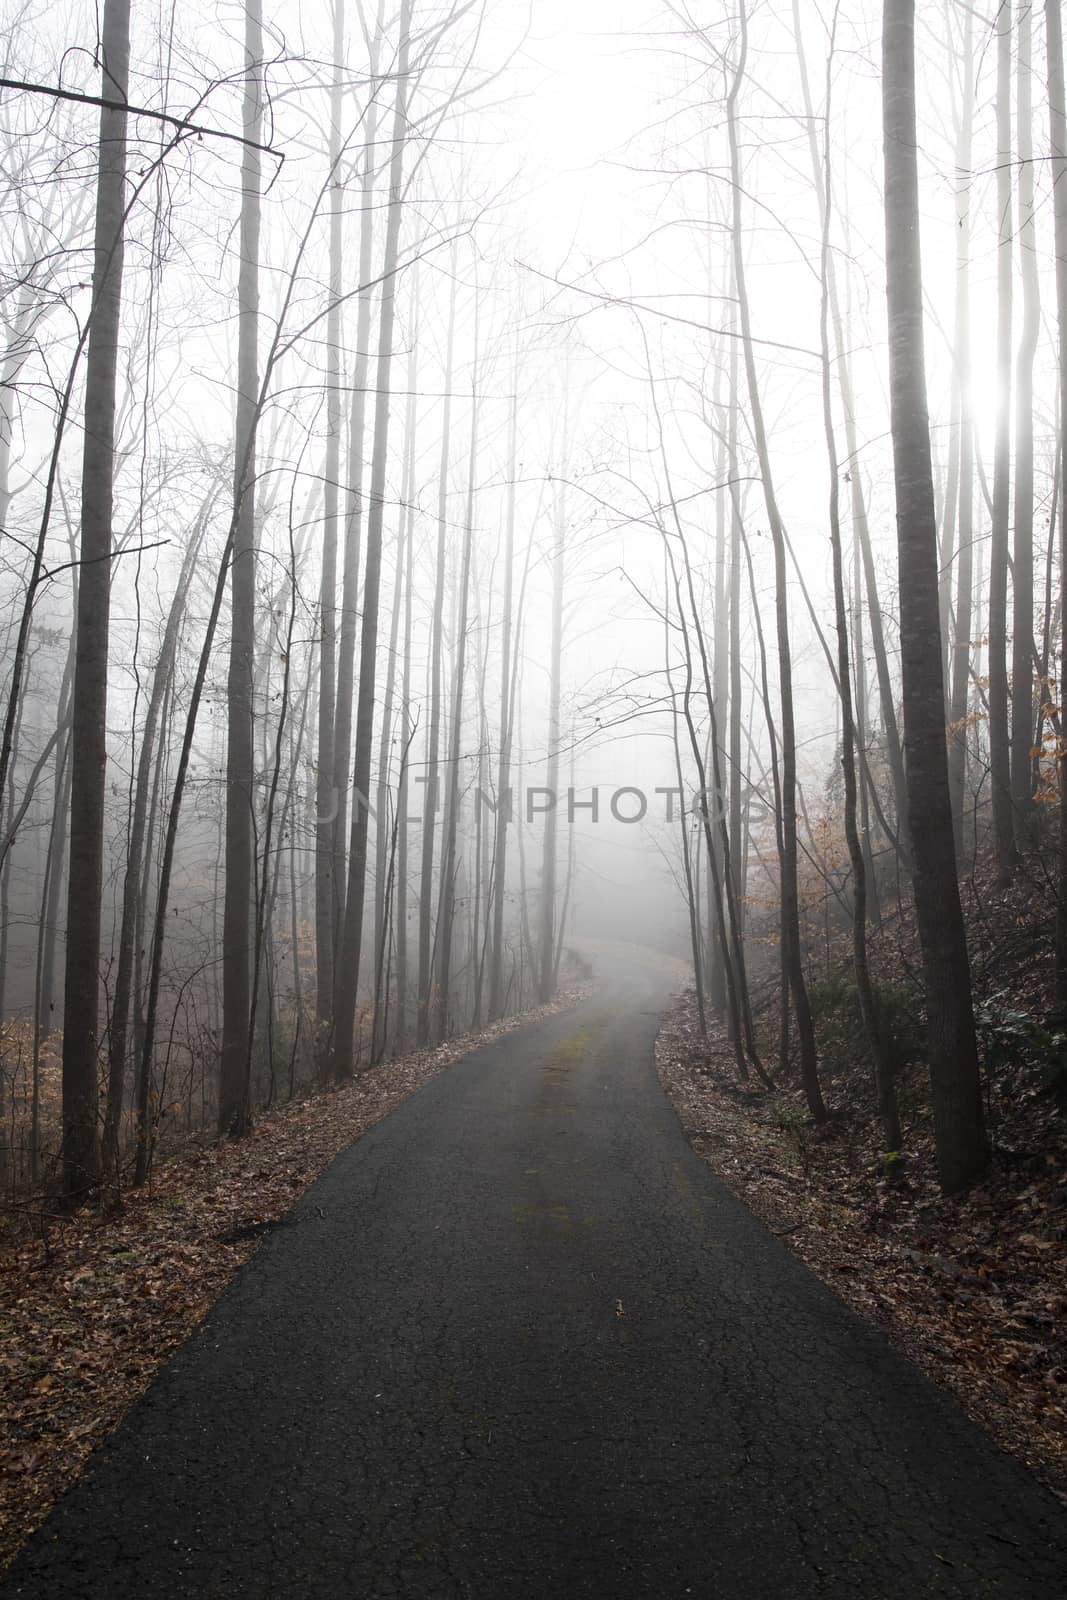 Looking Down a Rural Drive on a Foggy Morning by CharlieFloyd